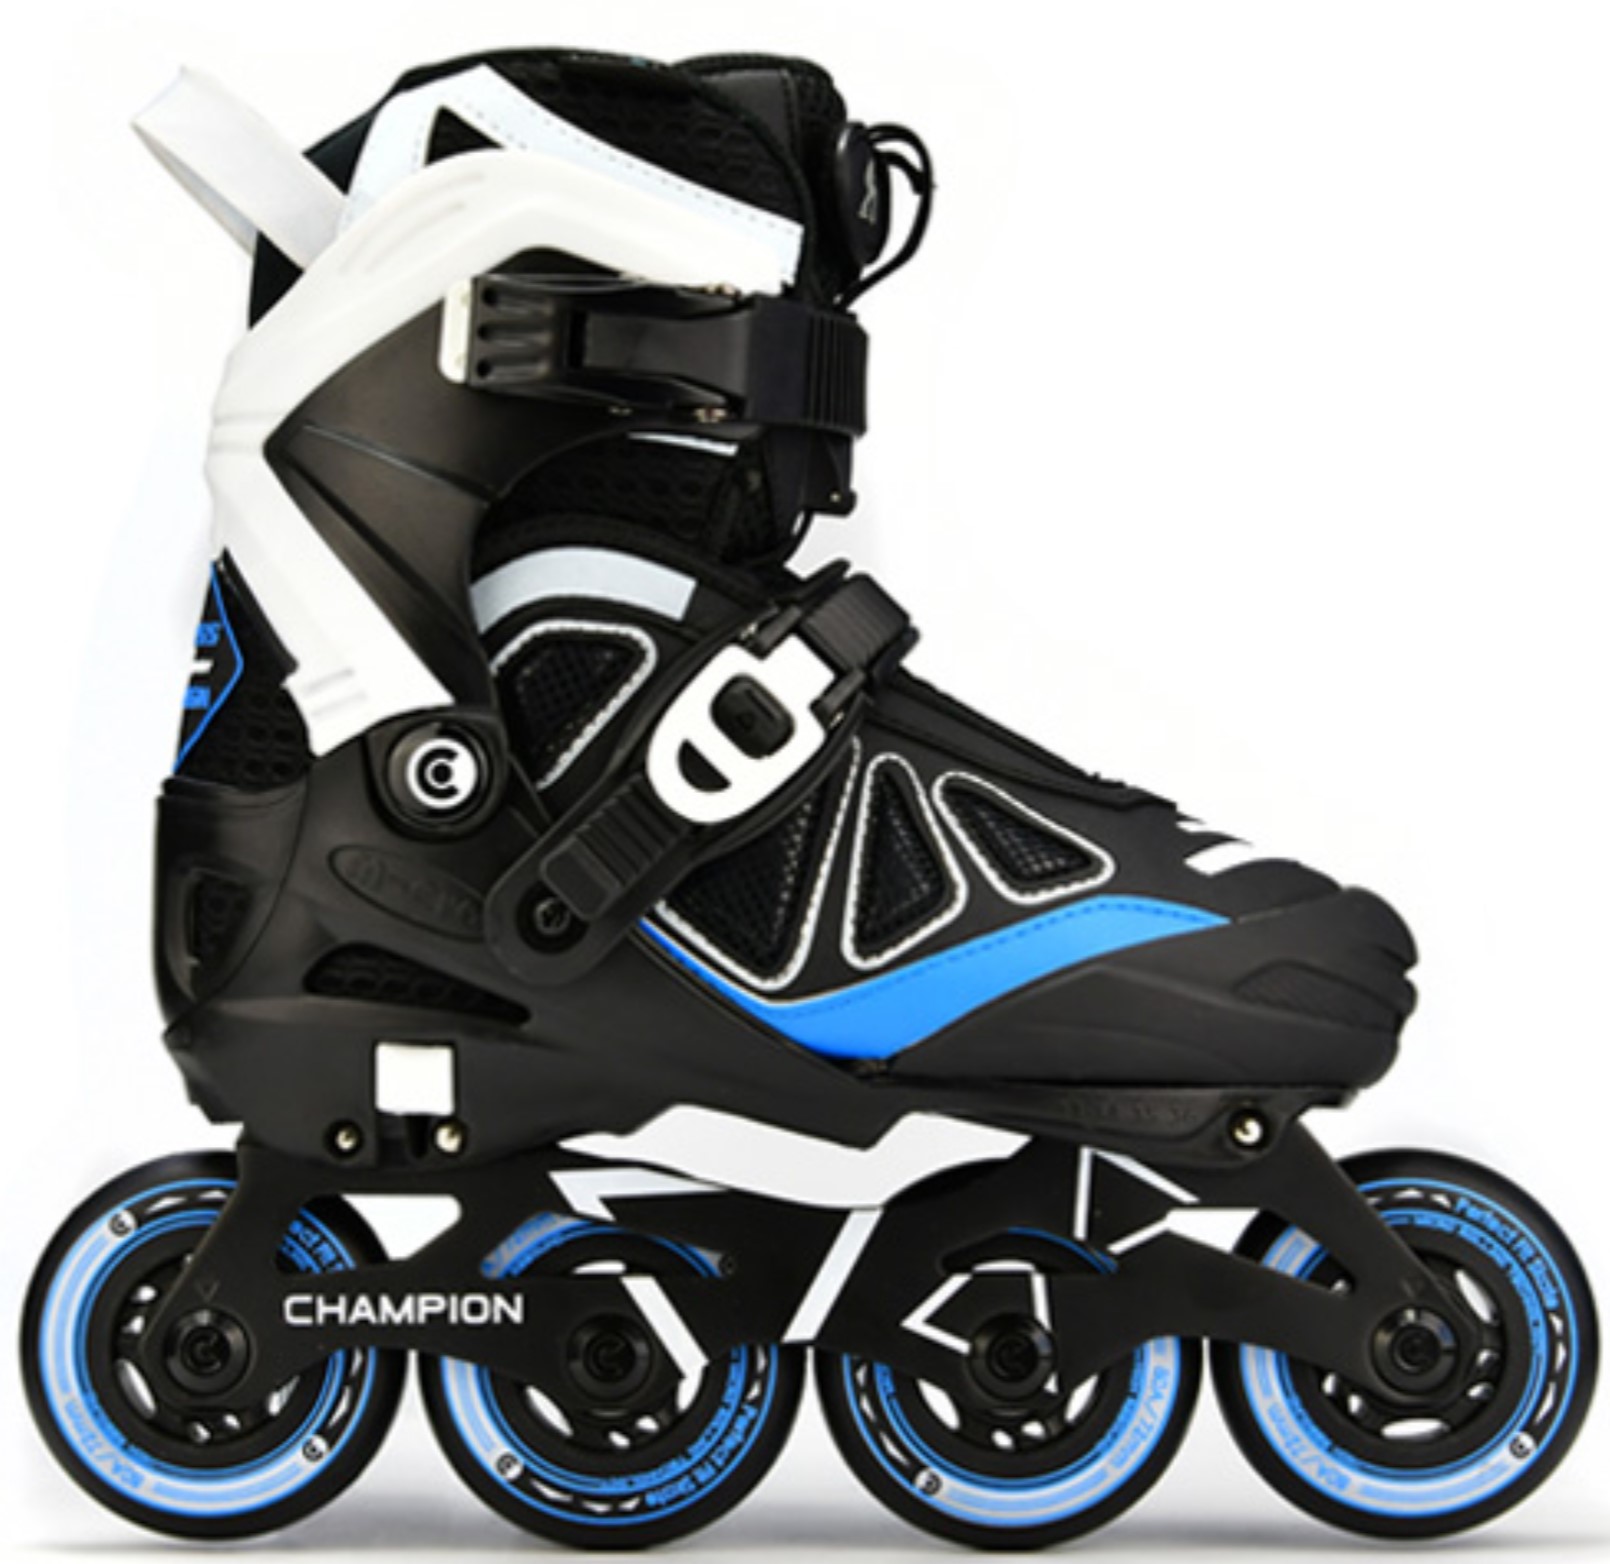 Micro Champion inline skate for kids adjustable in size in colours black blue and white with 76 mm wheels in side view